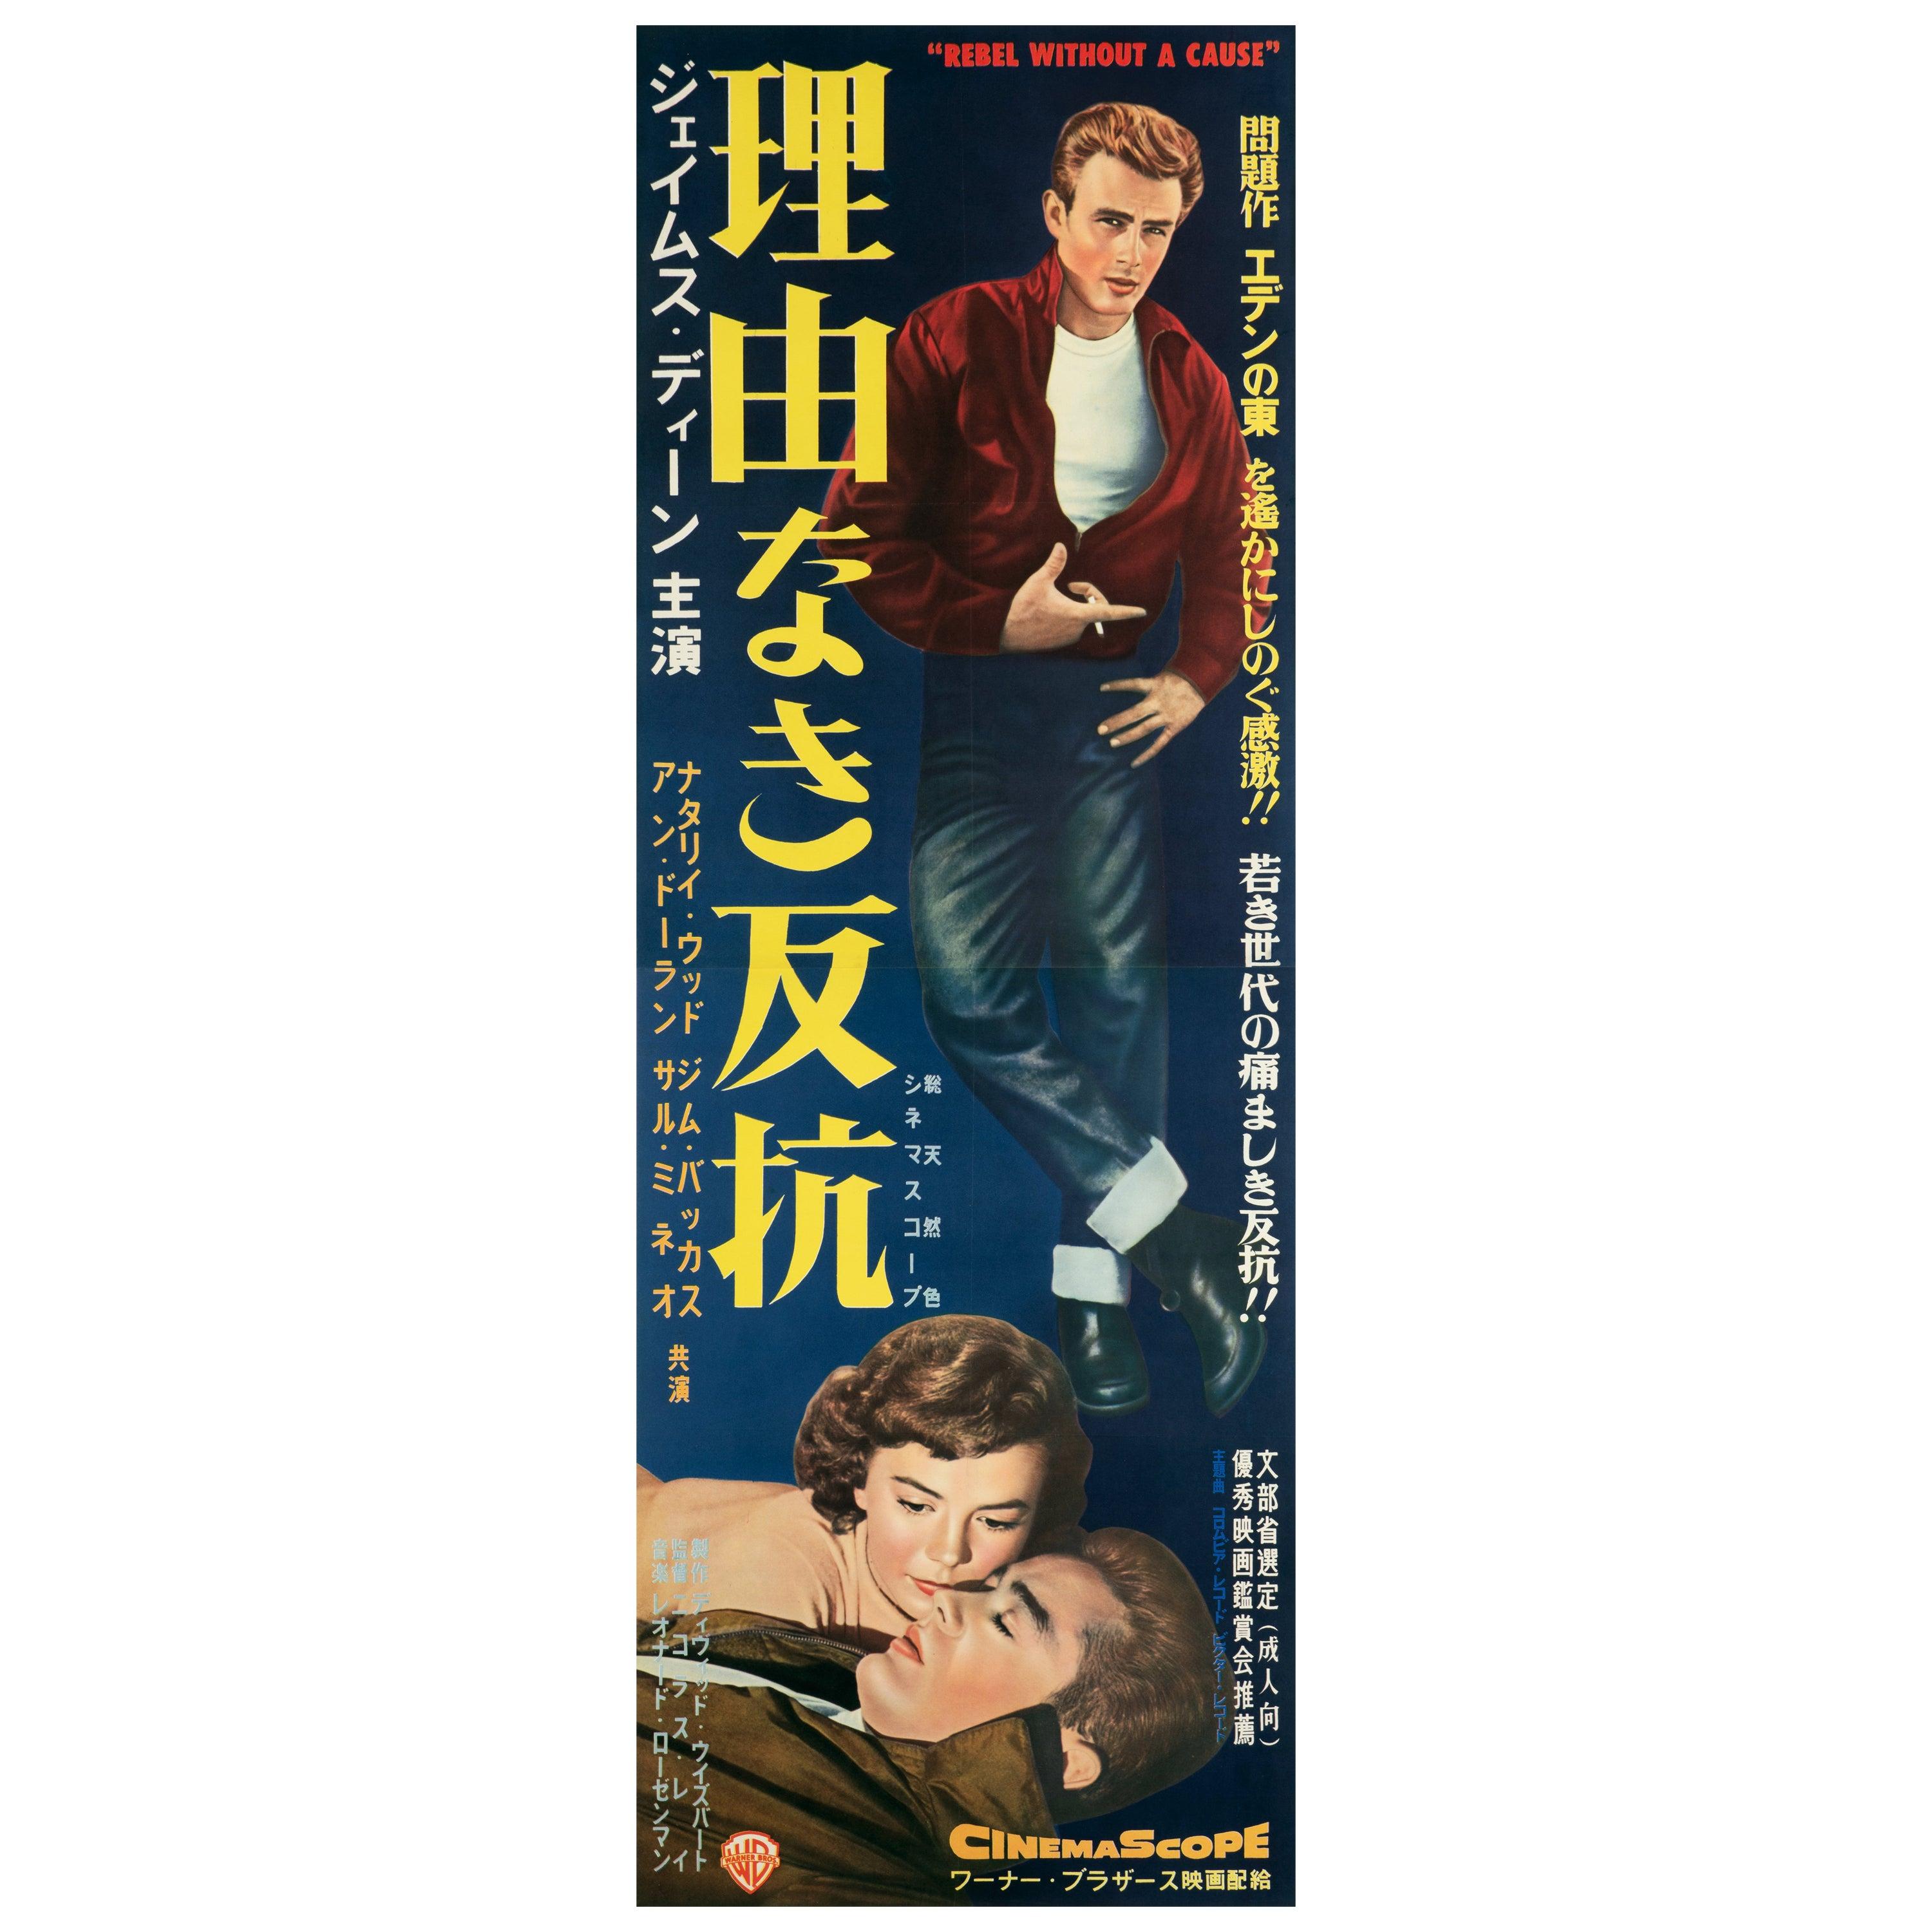 James Dean 'Rebel Without A Cause' Original Vintage Movie Poster, Japanese, 1956